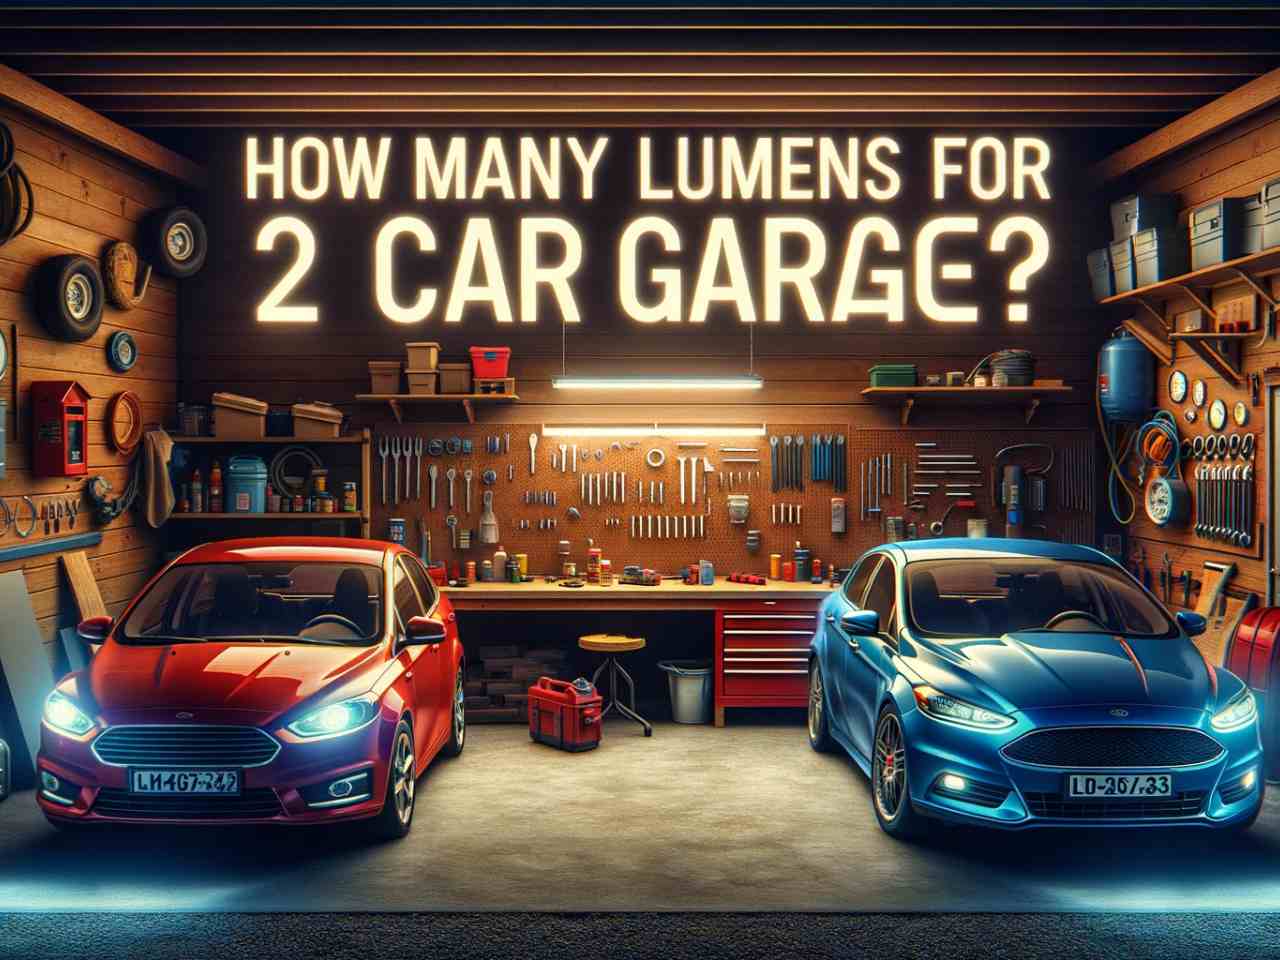 How Many Lumens for 2 Car Garage – Everything you need to know